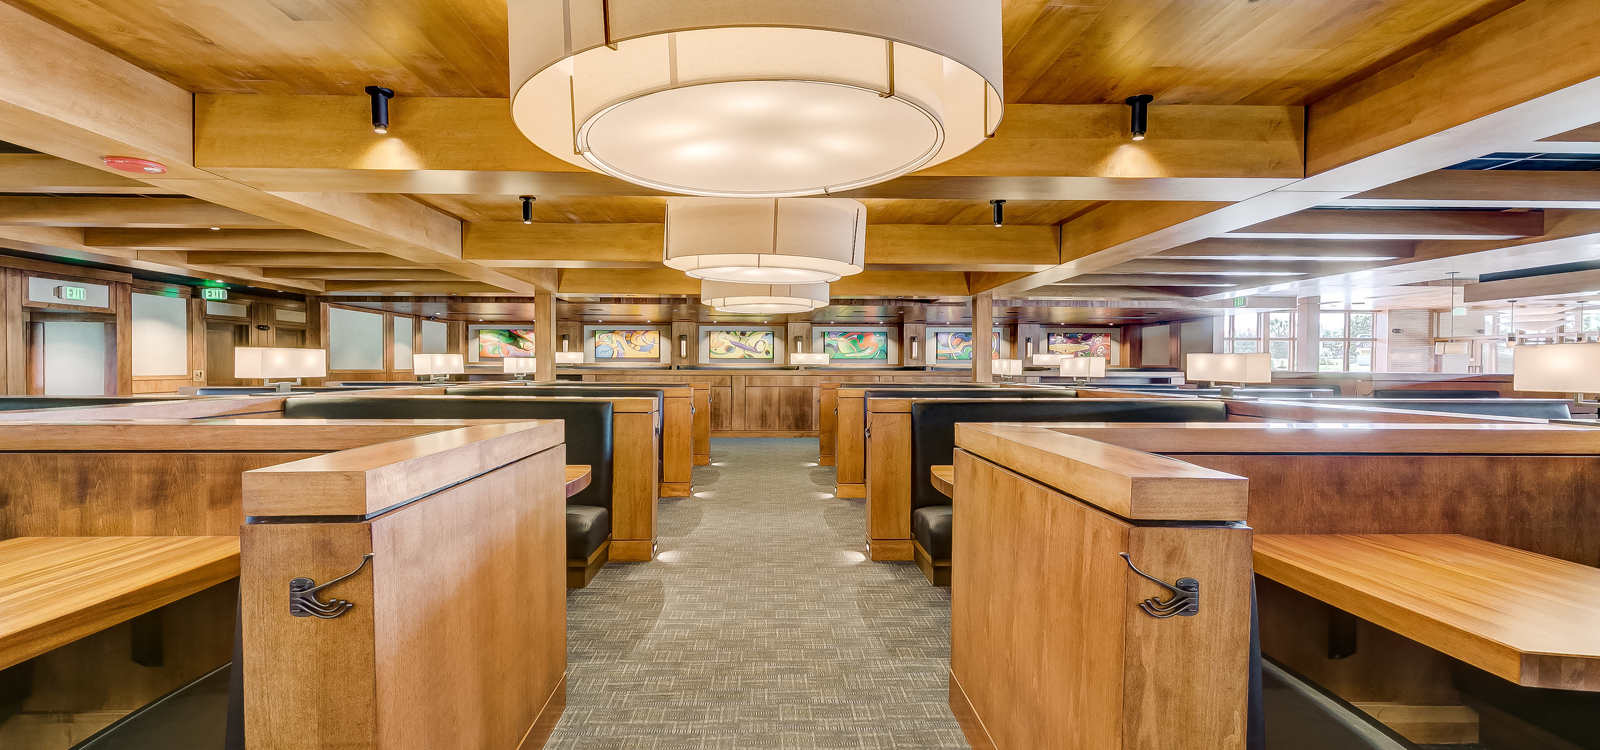 Copper Canyon Grill, Arundel Mills MD, by UrbanBuilt